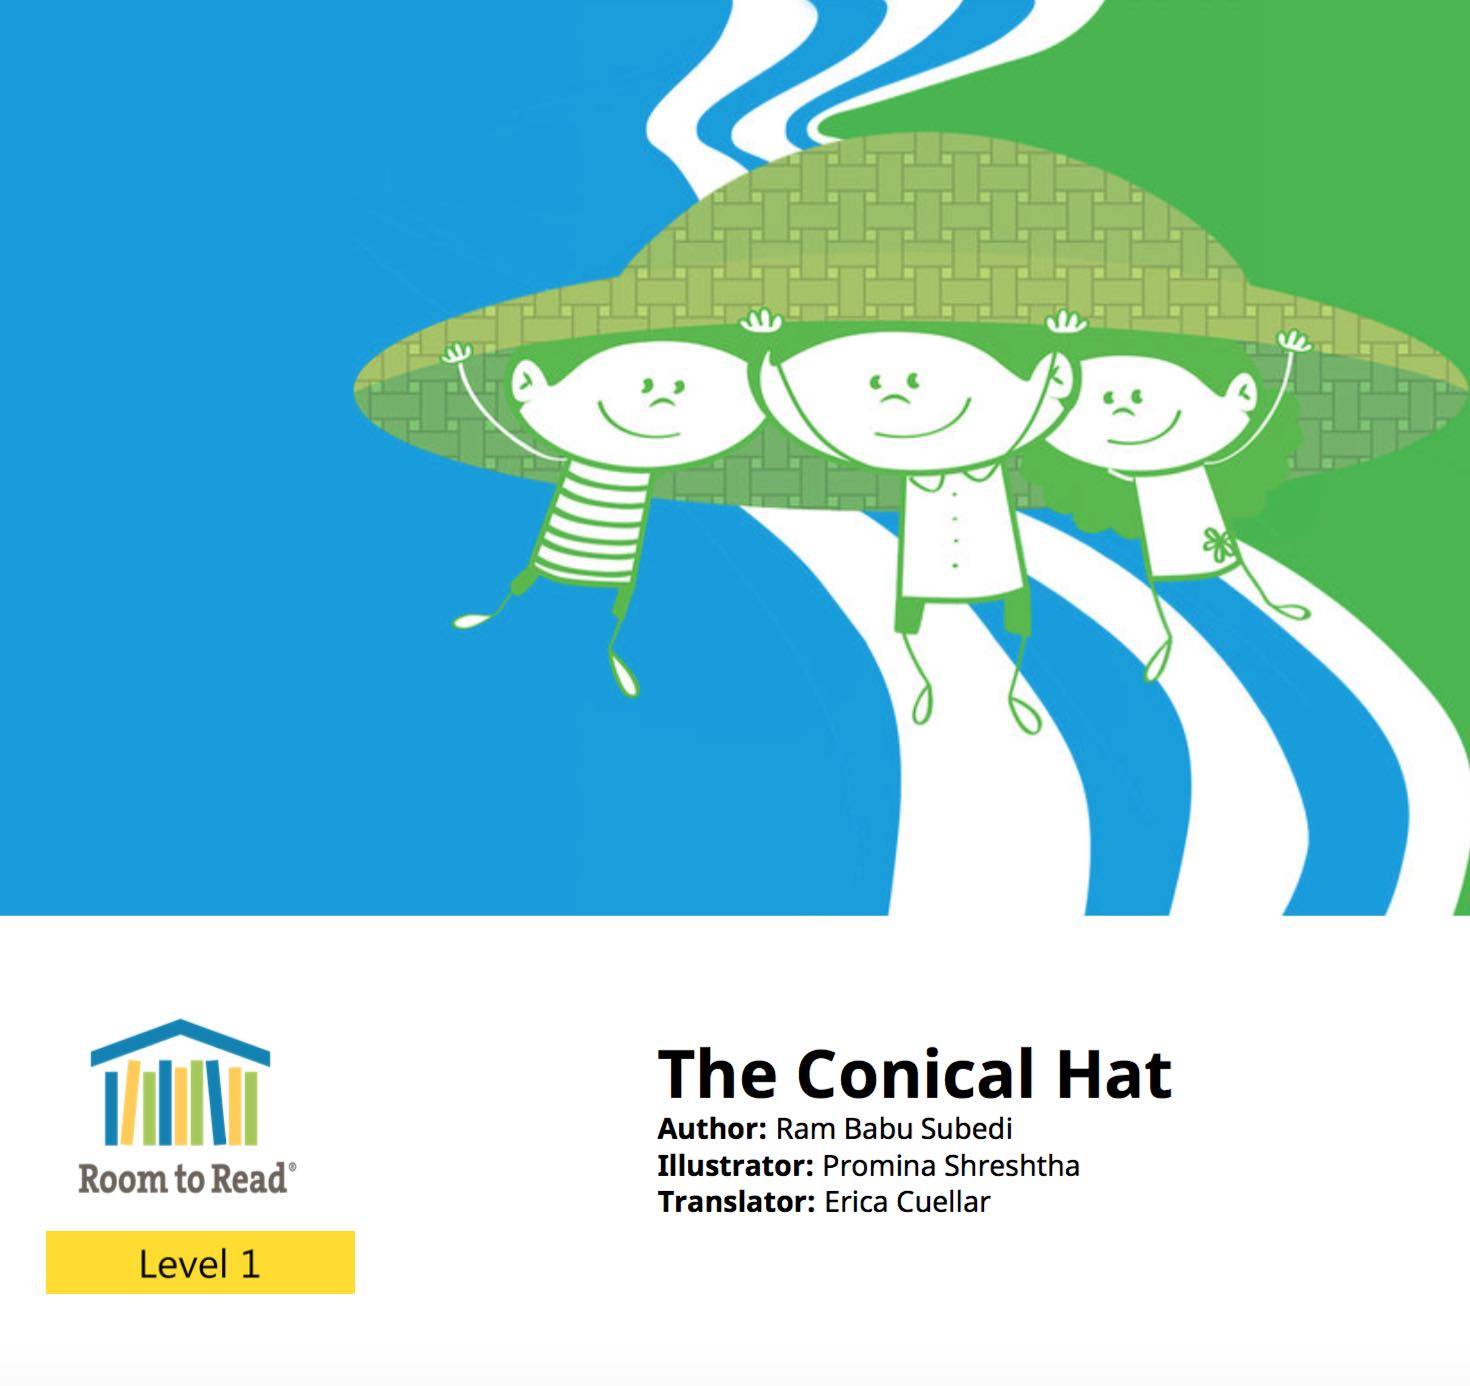 The Conical Hat children's story